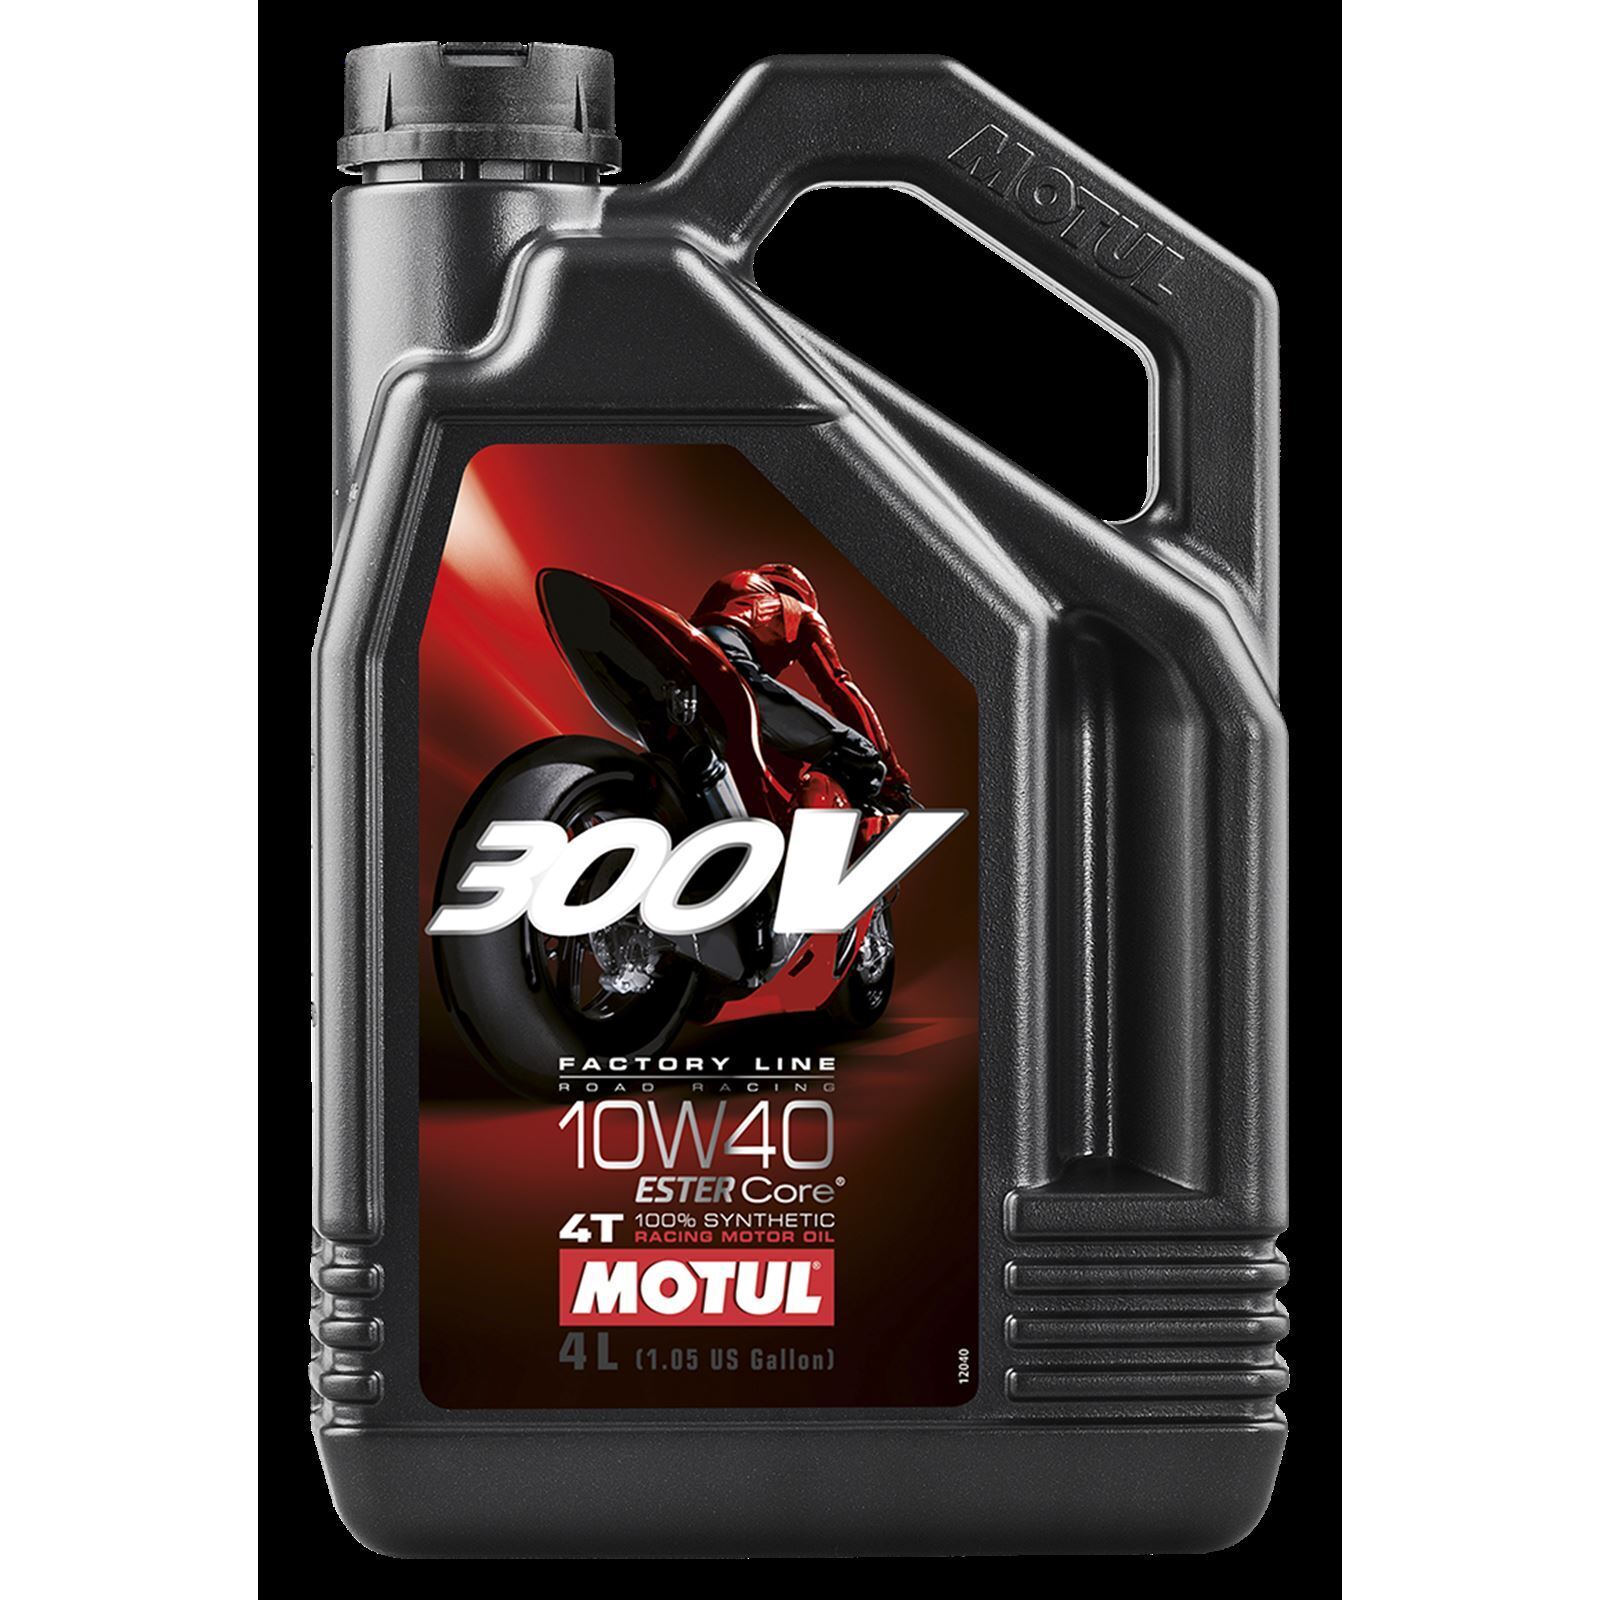 Motul 300V 4T Competition Synthetic Oil 10W40 - 4 Liter 104121